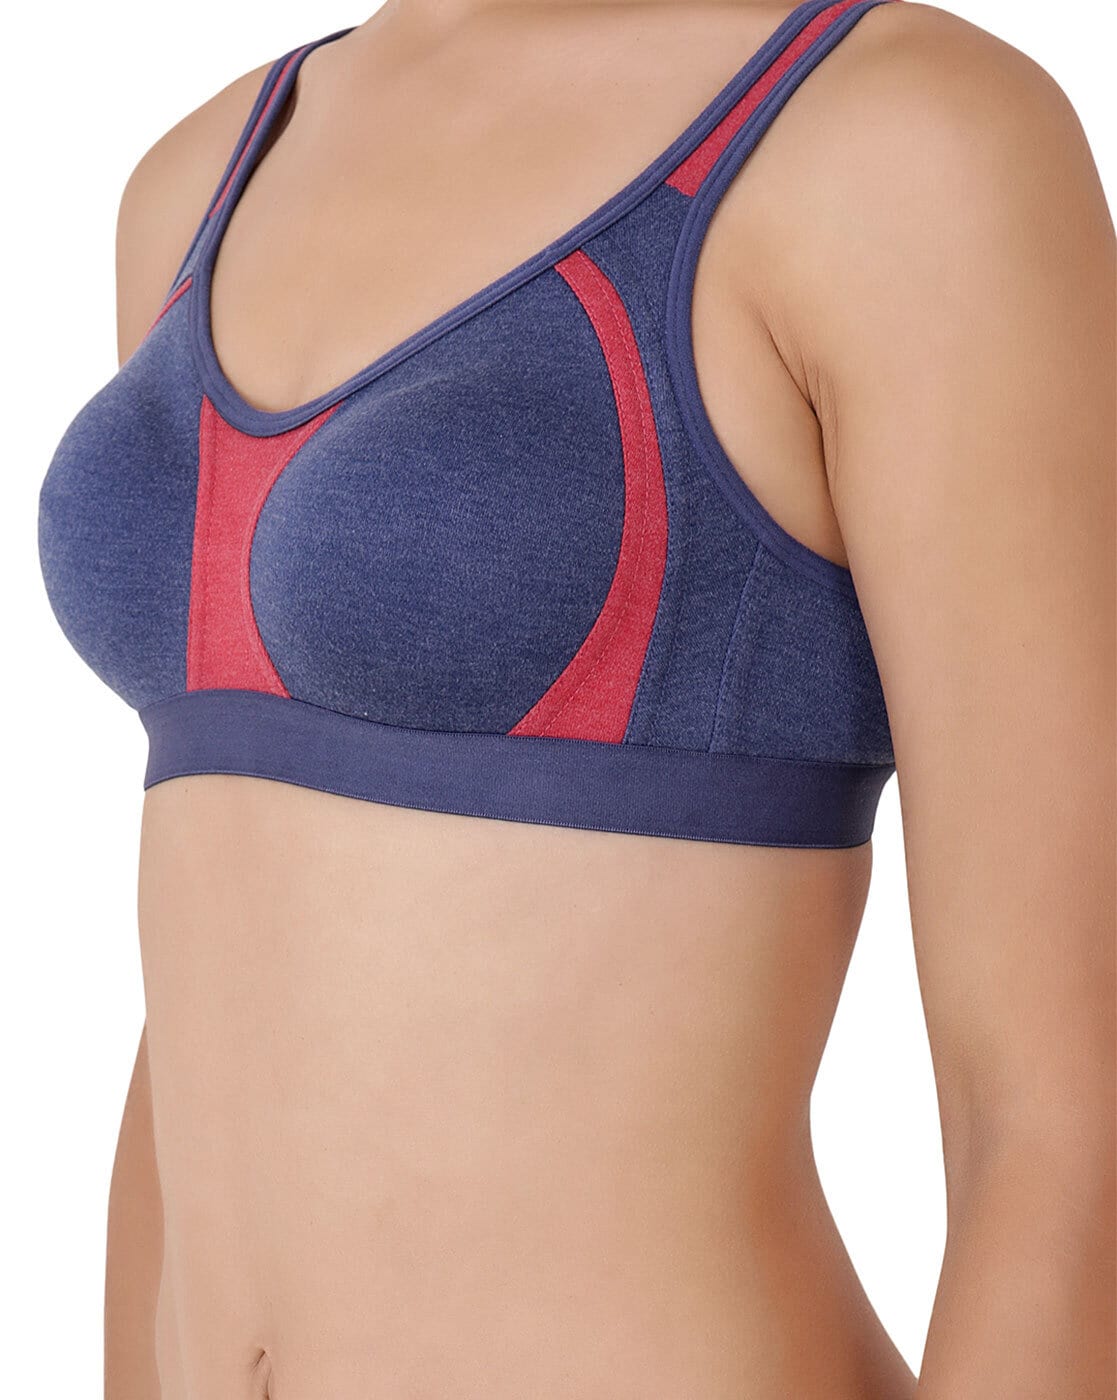 Floret Pack of 2 Full-Coverage Sports Bras T 3001 - Multi-Color (38B)